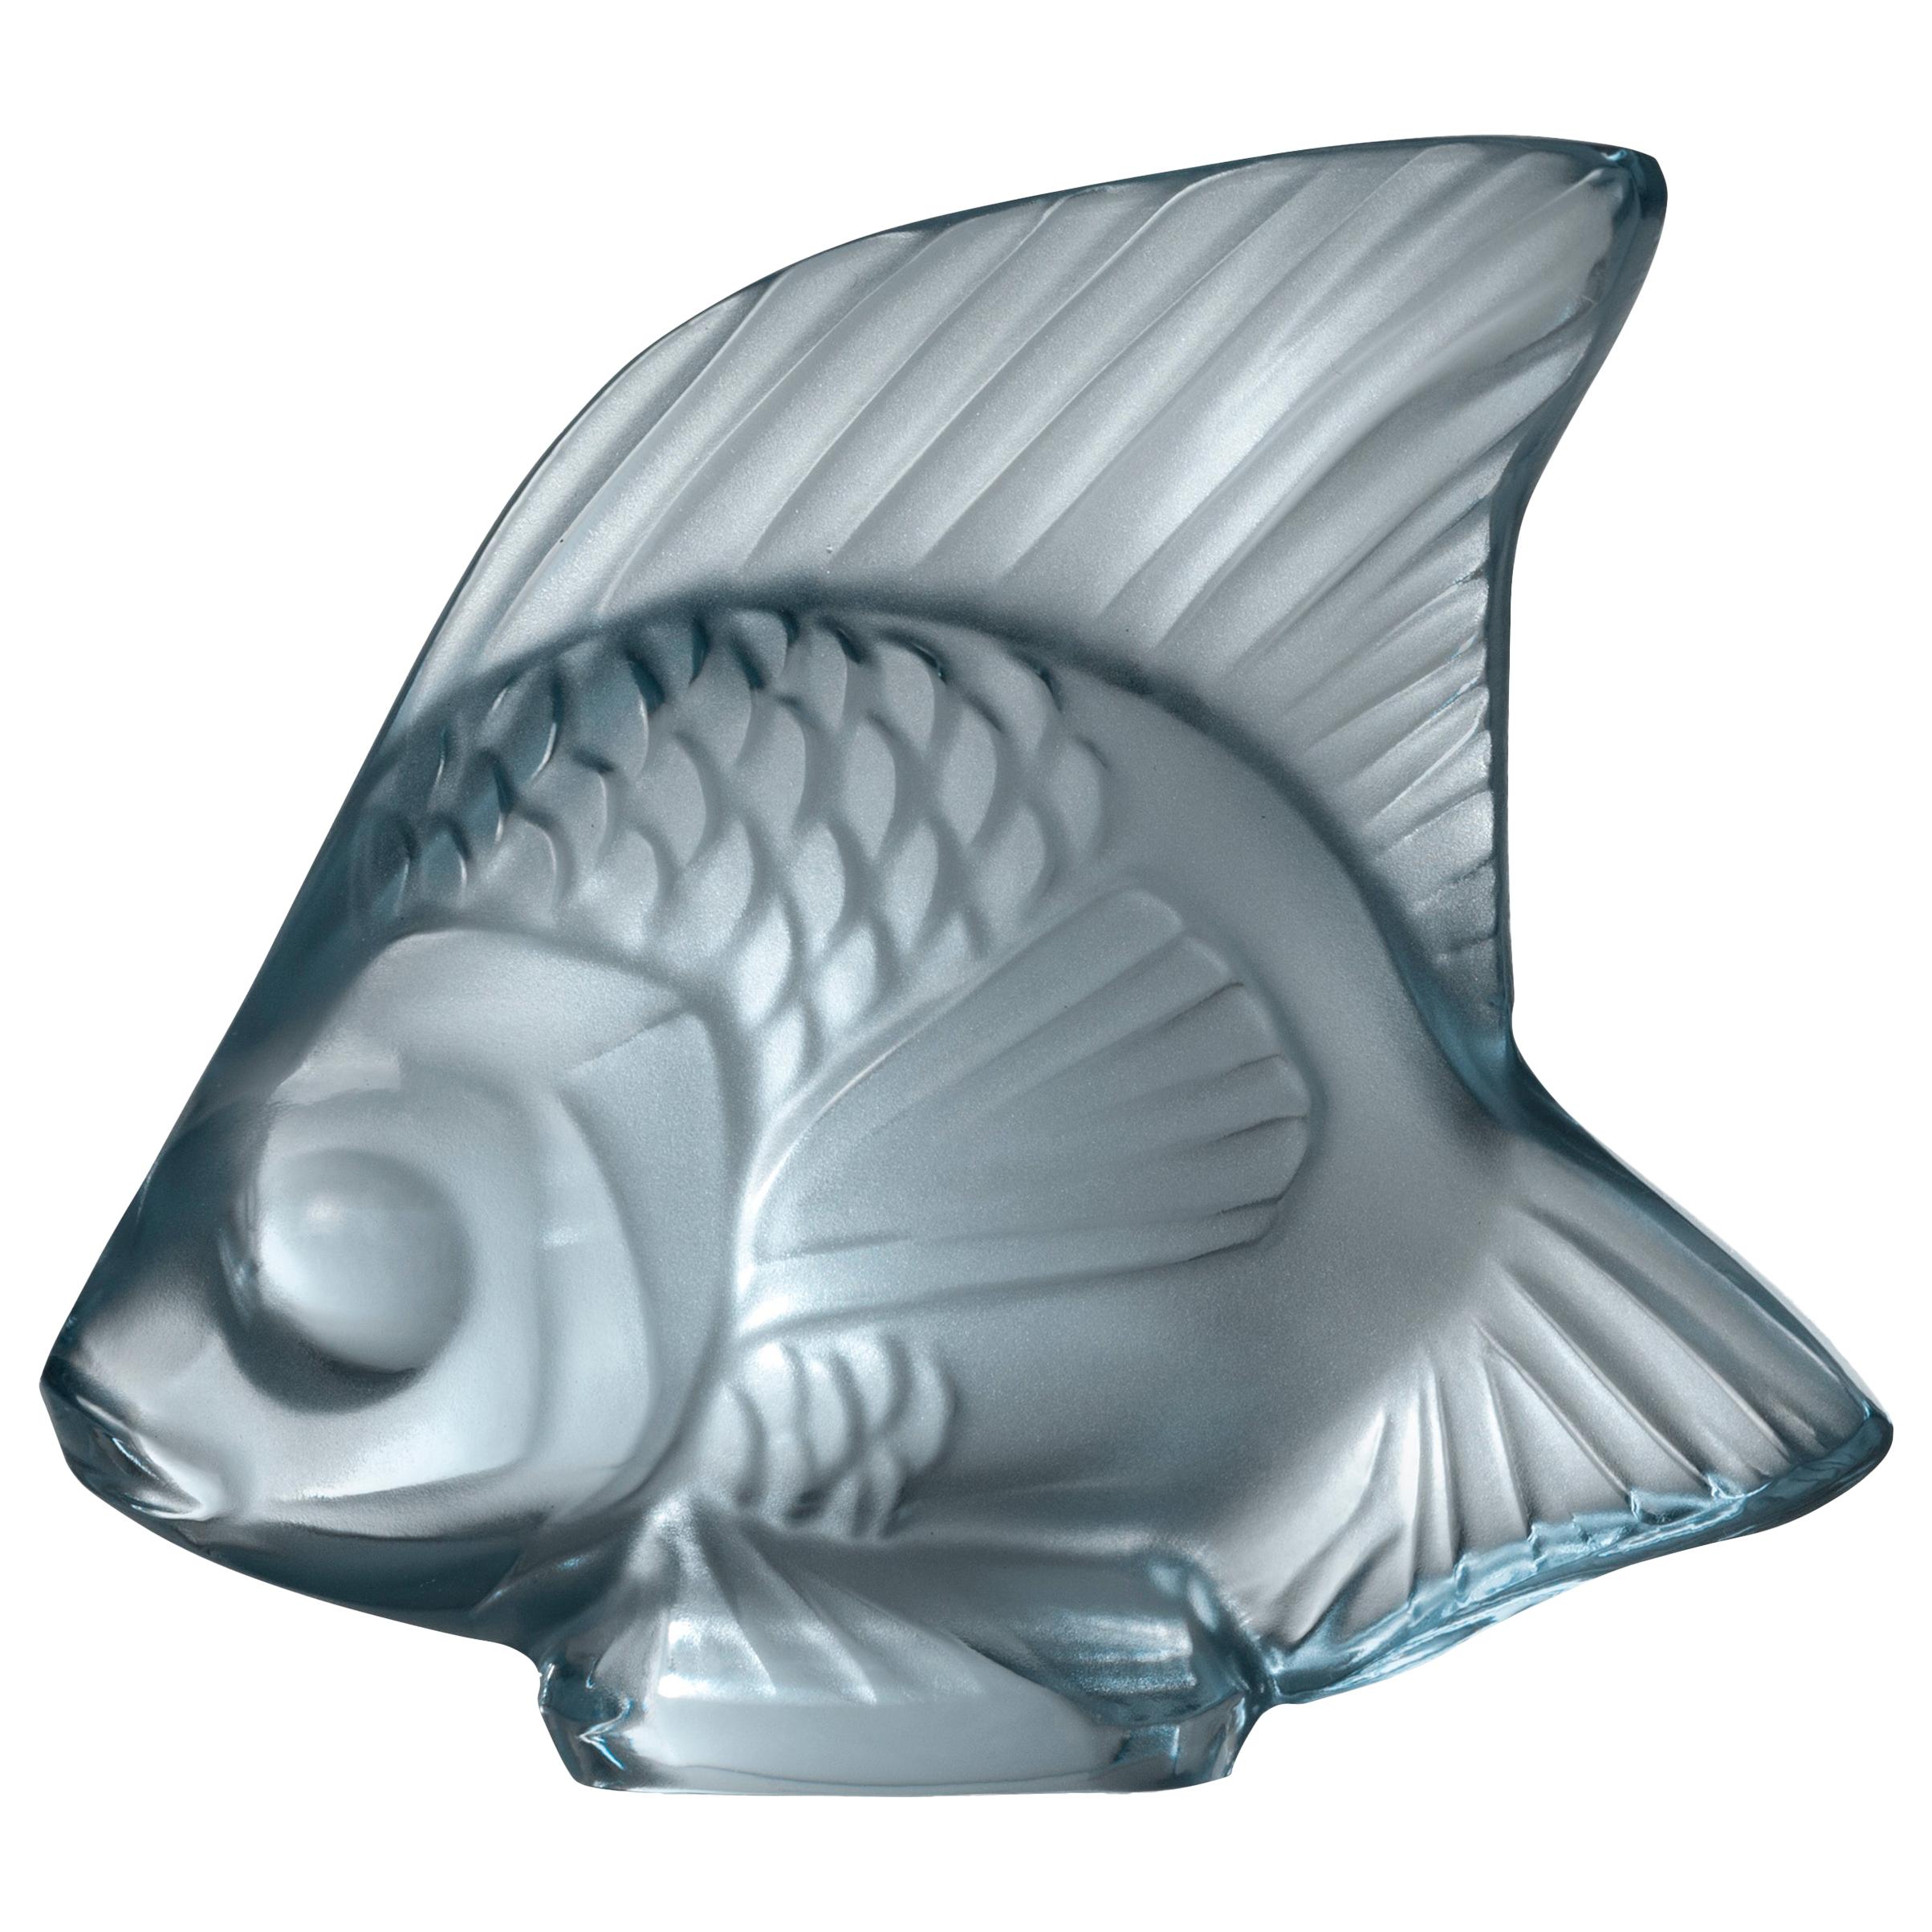 For Sale: Blue (Persepolis Blue) Fish Sculpture in Crystal Glass Luster by Lalique